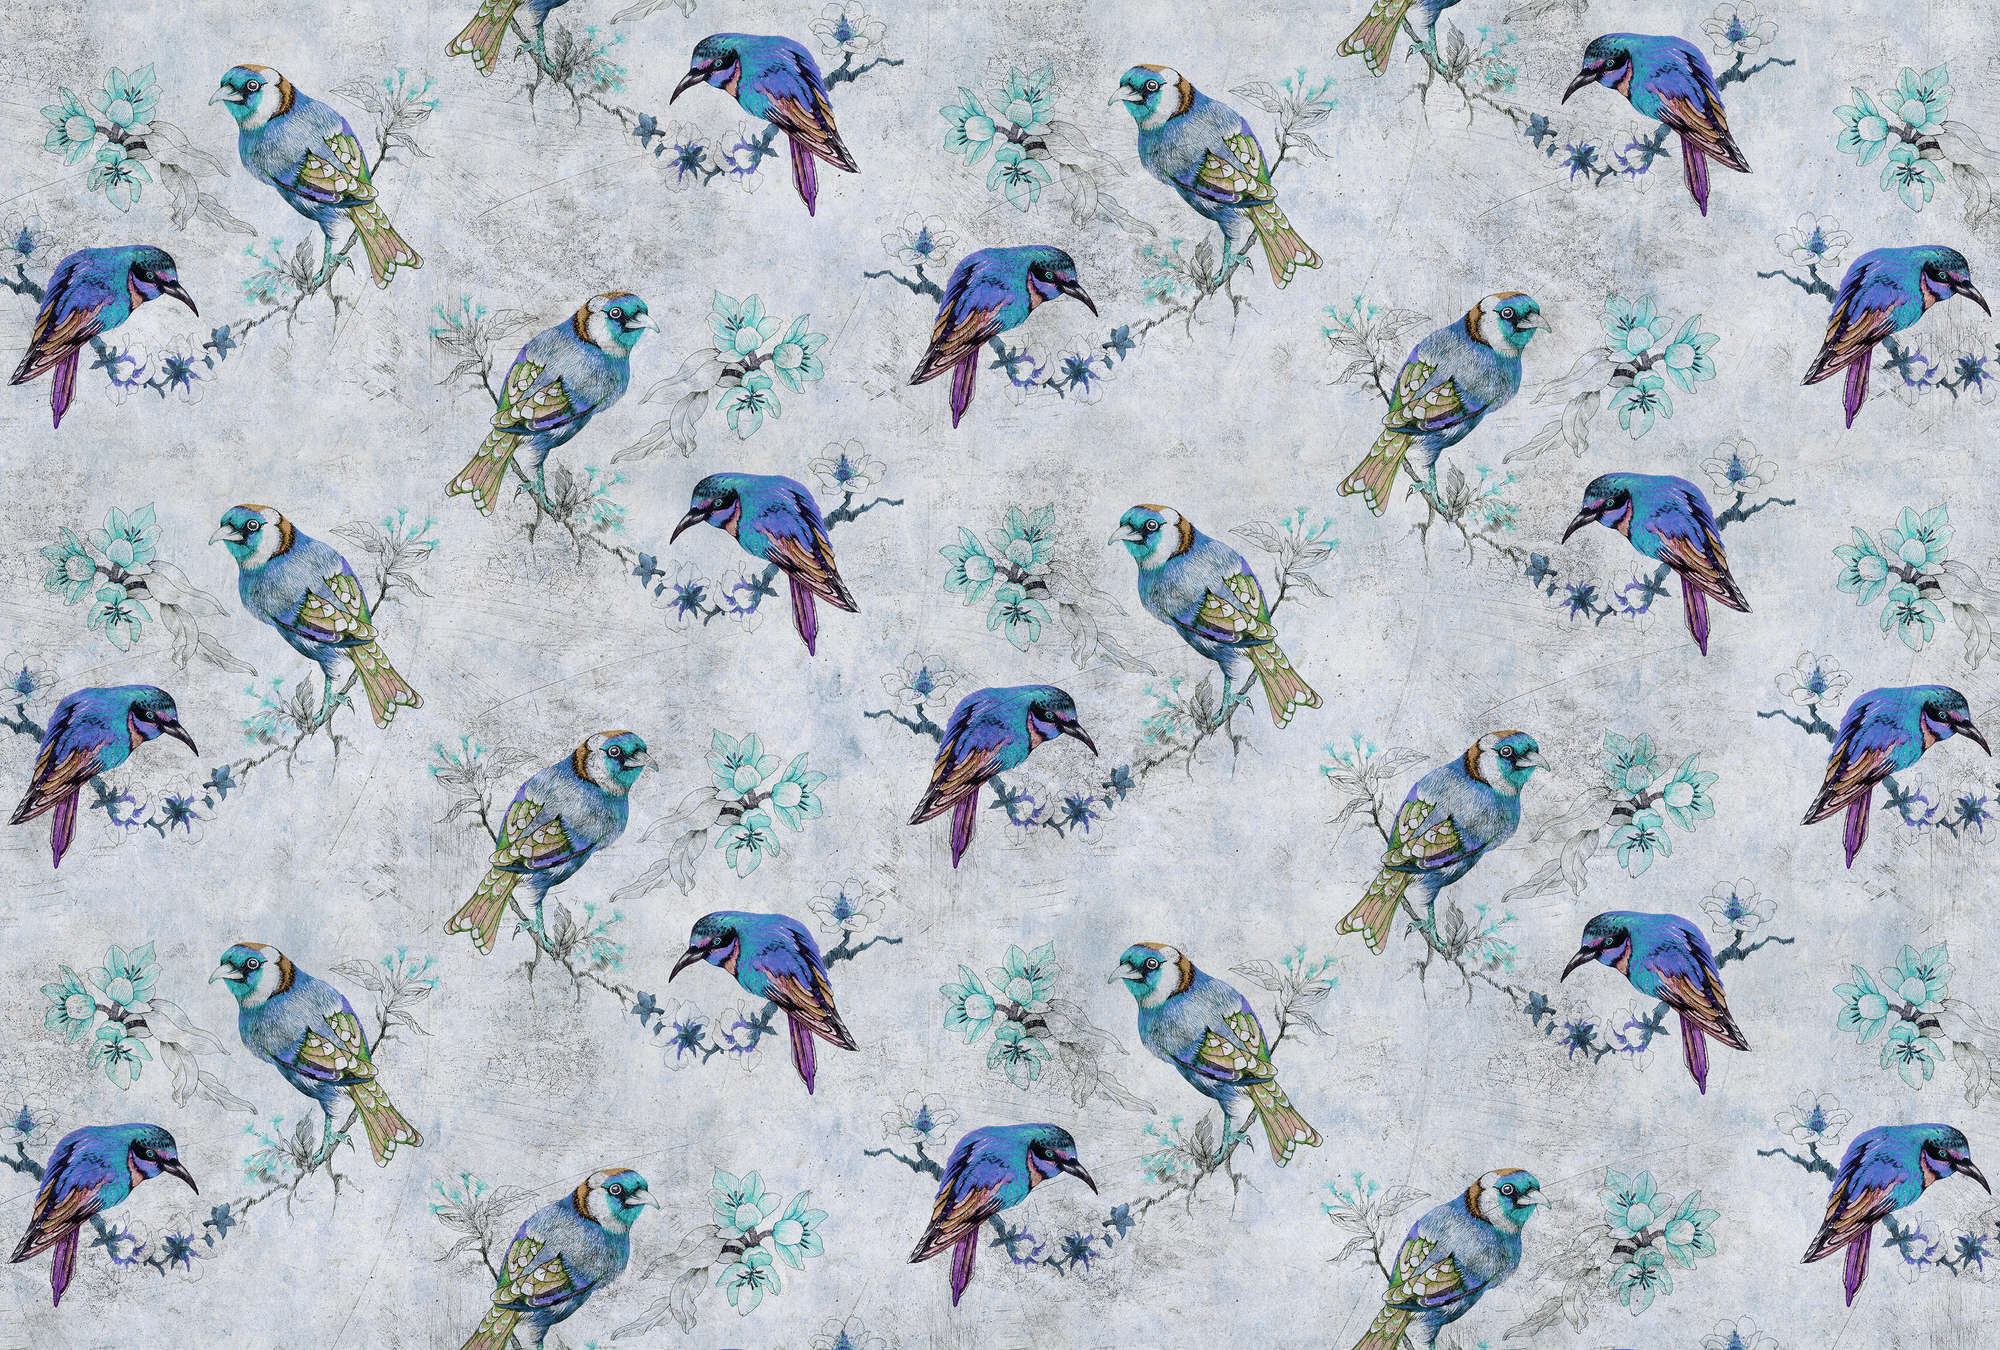             Love birds 1 - Photo wallpaper bird pattern in drawing style in scratchy structure - Blue, Grey | Structure non-woven
        